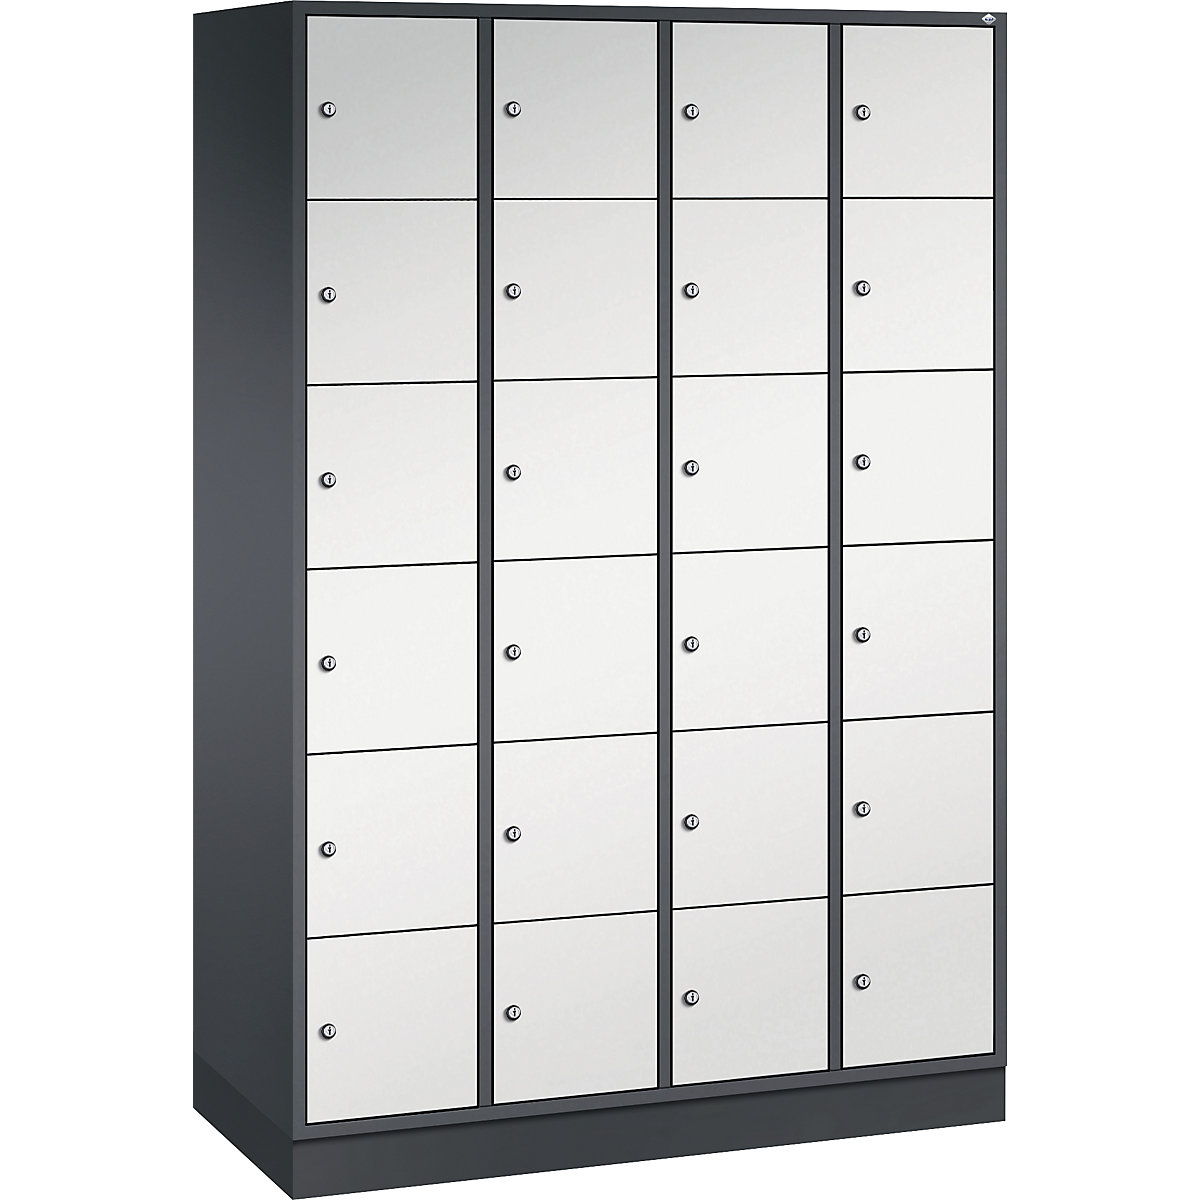 INTRO steel compartment locker, compartment height 285 mm - C+P